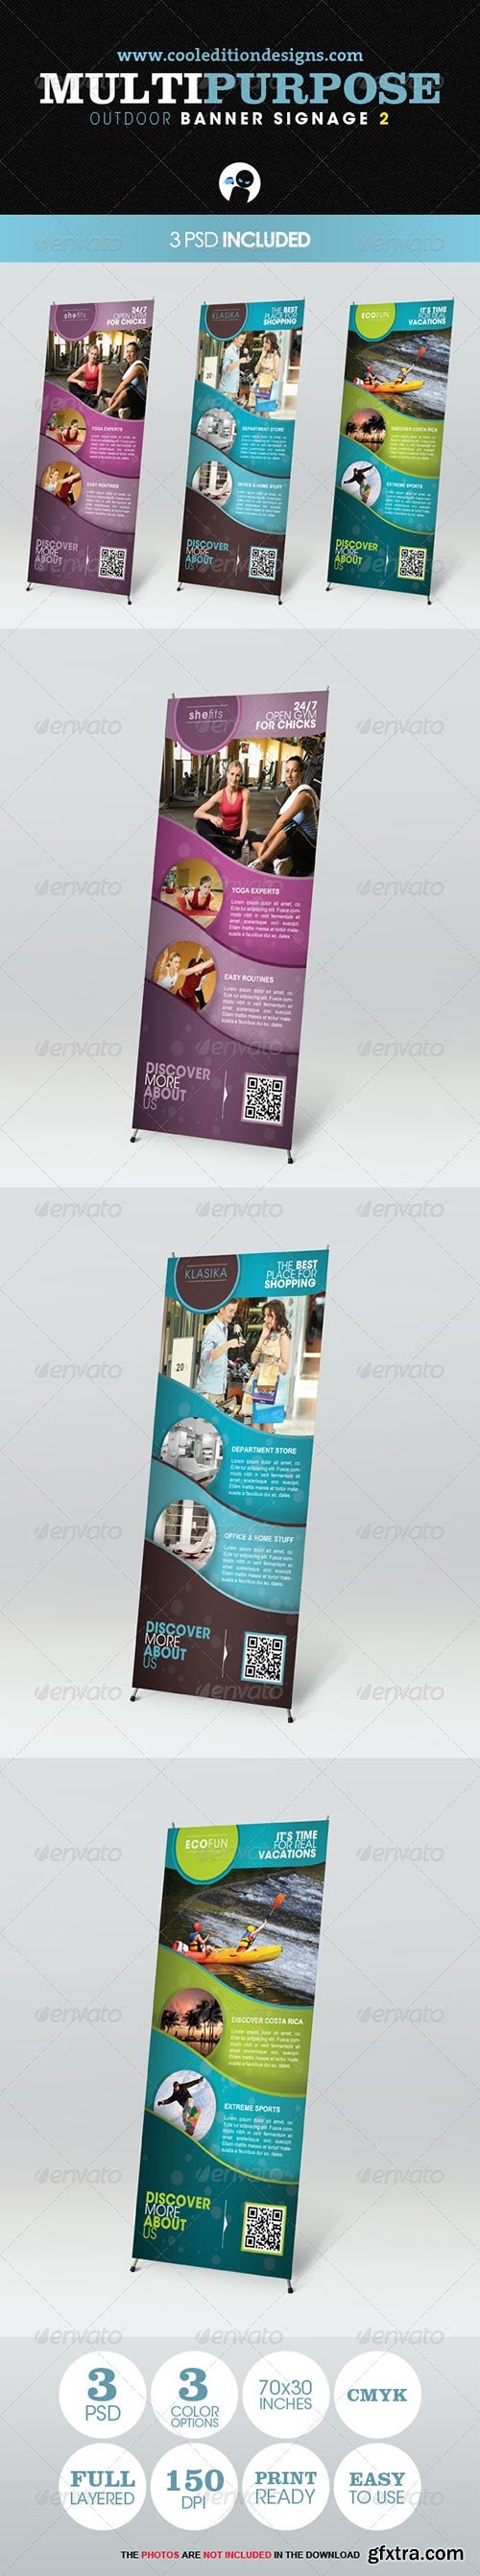 GraphicRiver - Multipurpose Outdoor Banner Signage 2